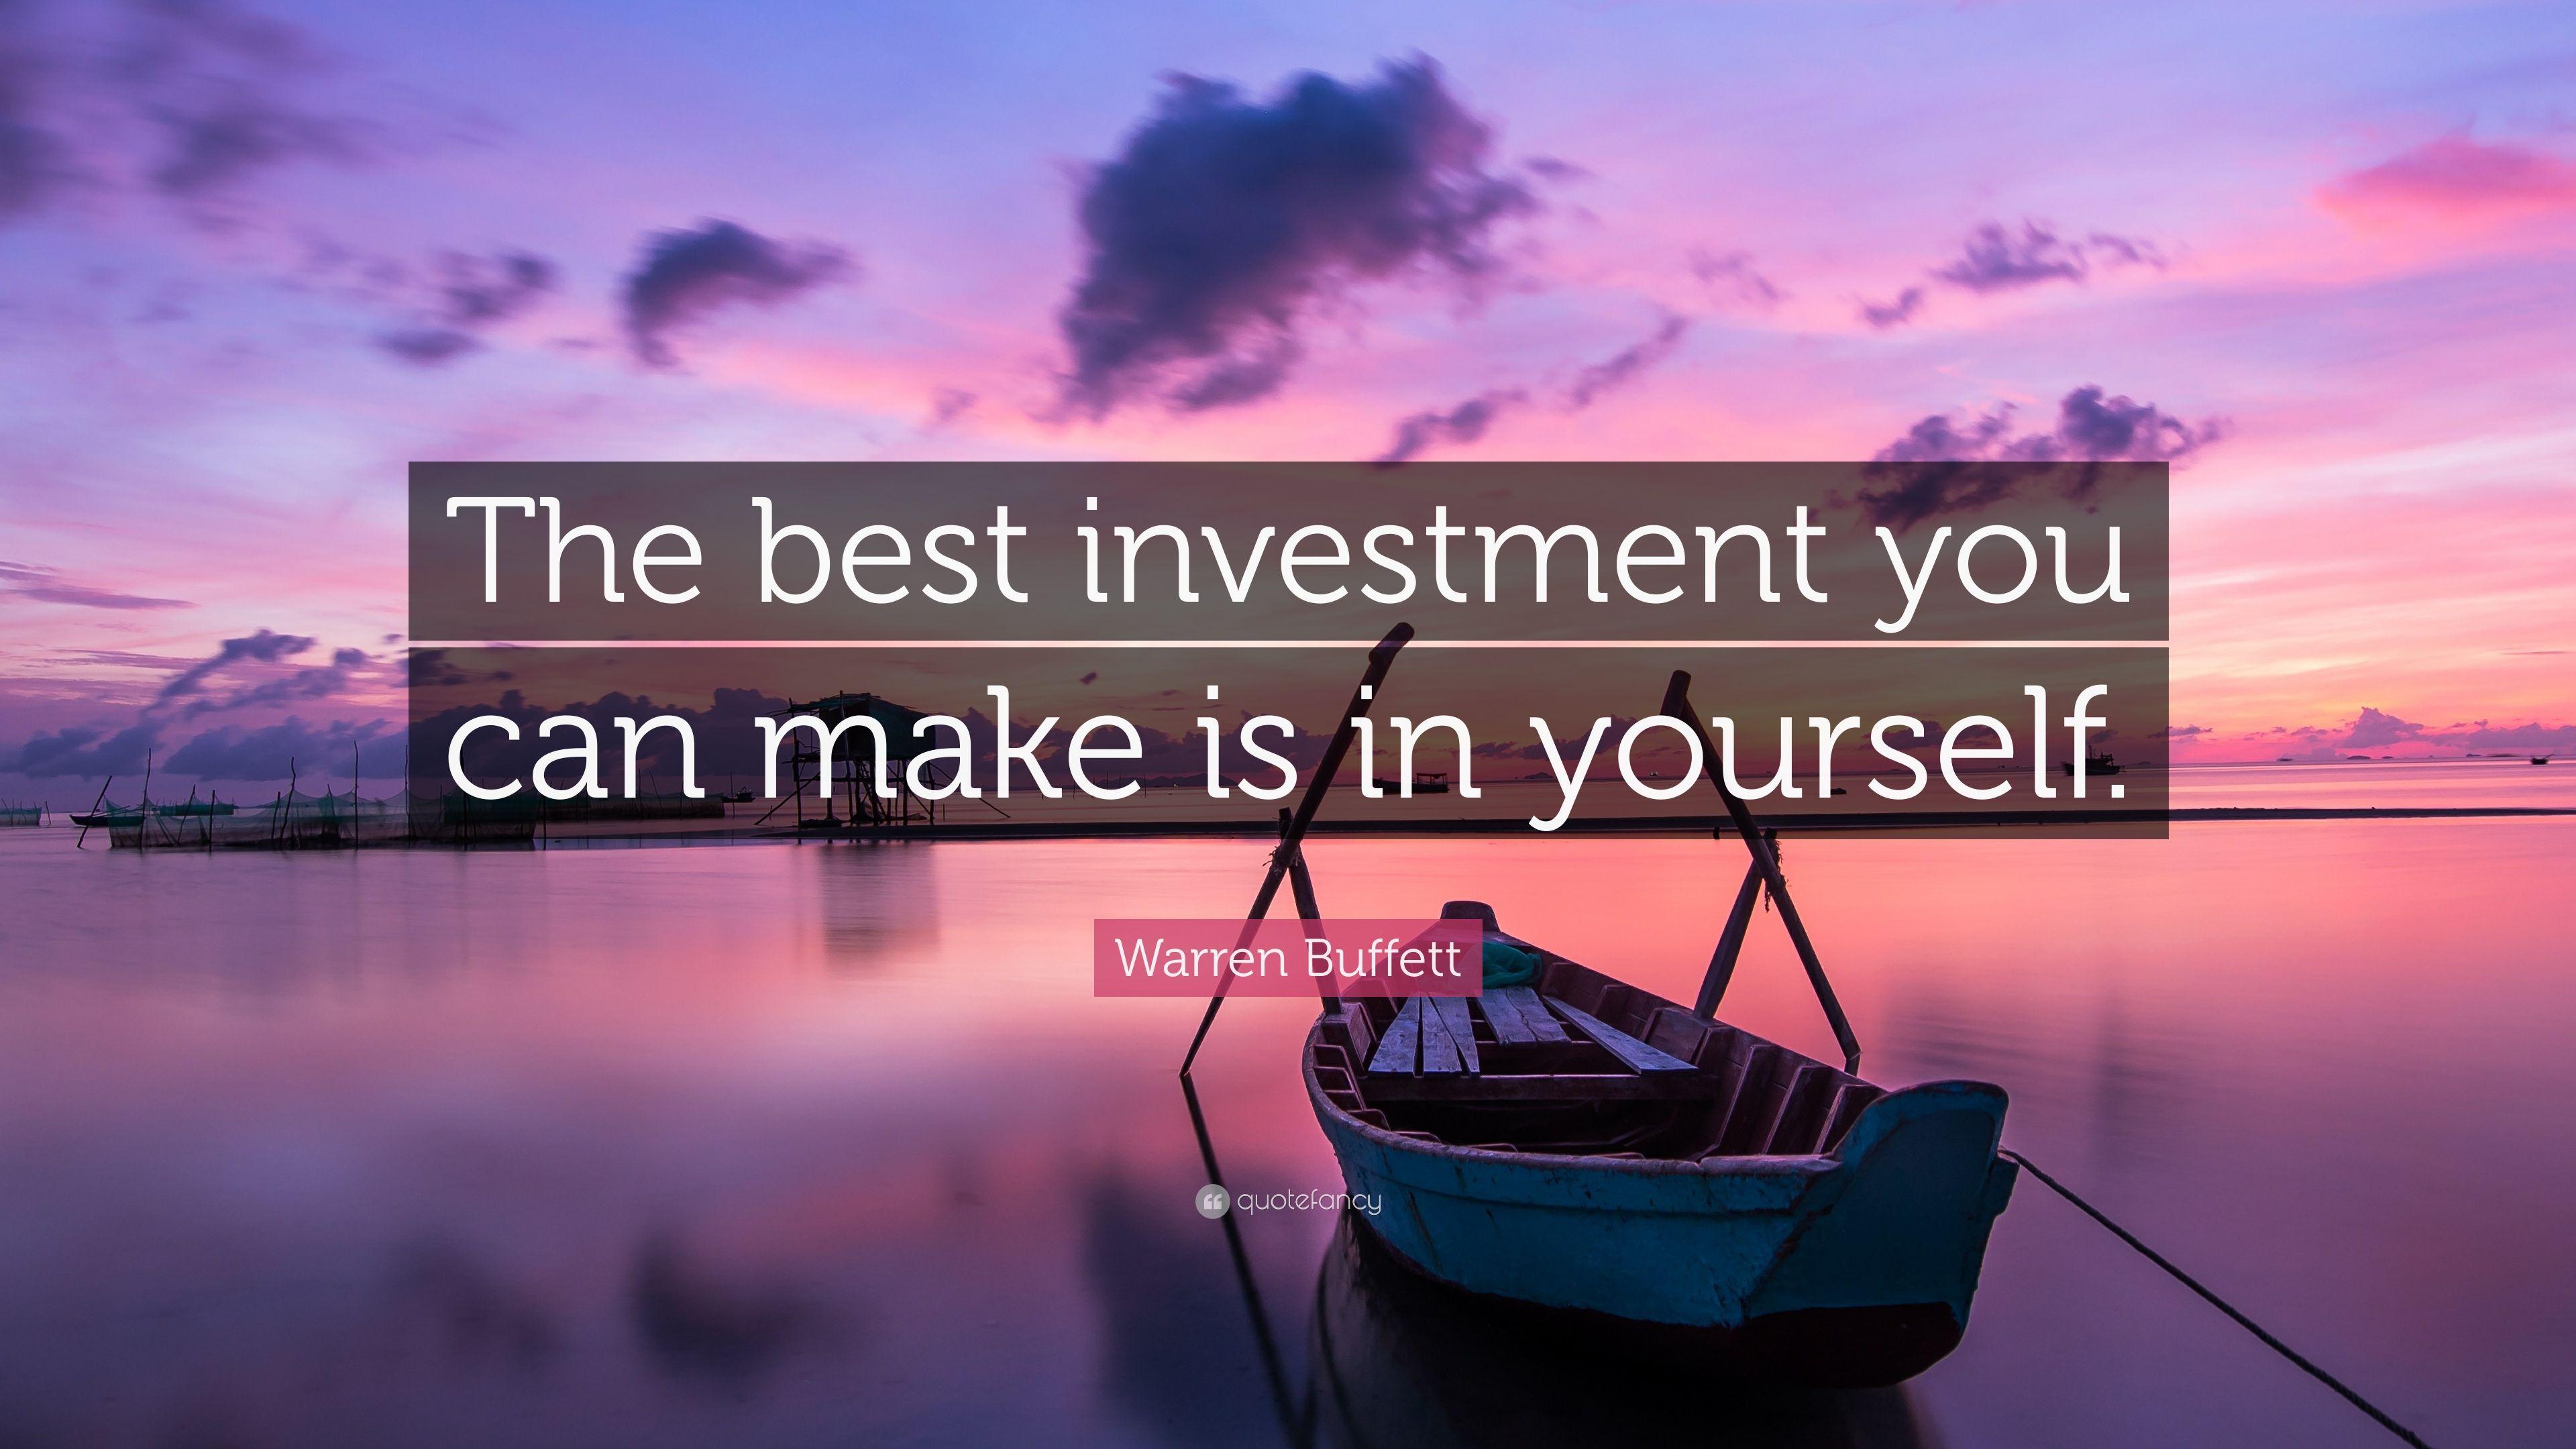 Warren Buffett Quote: “The best investment you can make is